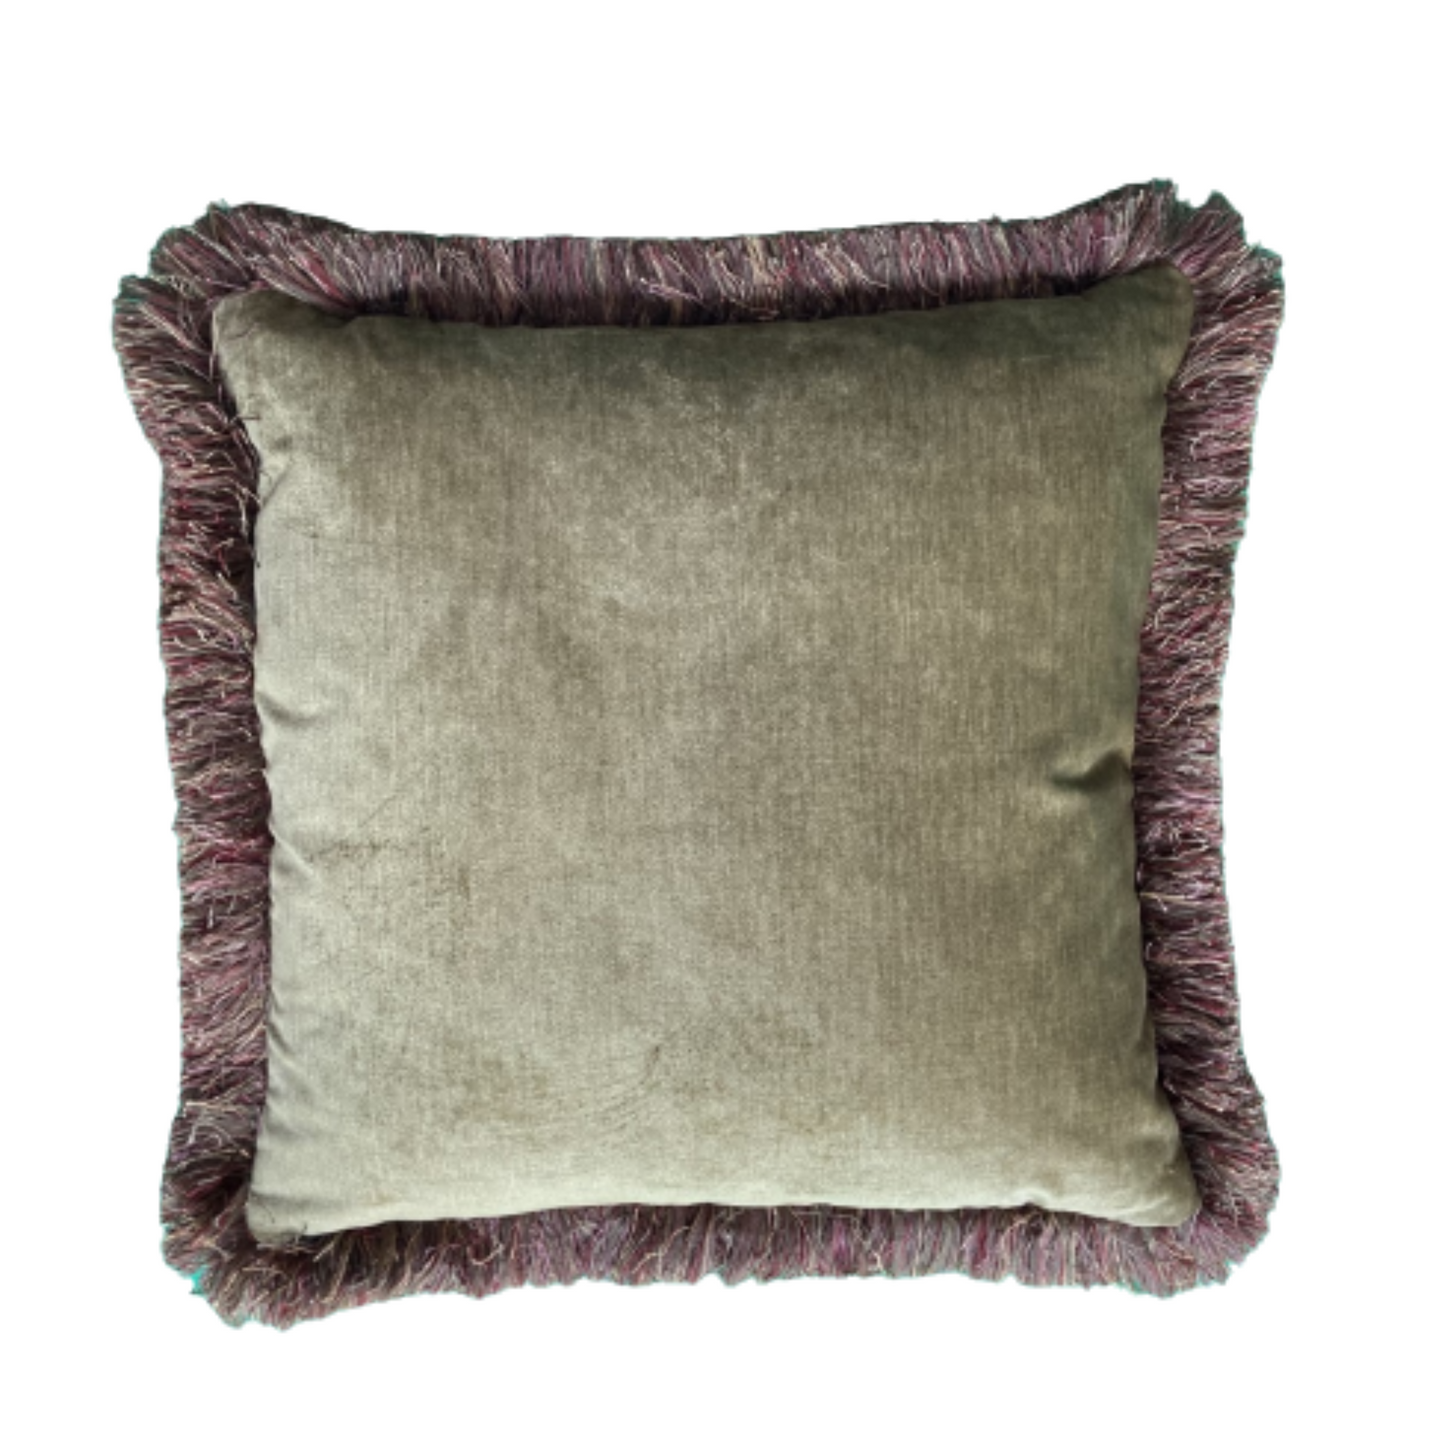 Moss Green Paisley Chenille 21 x 21 Square Decorative Pillow Fringe with Down Feather Insert